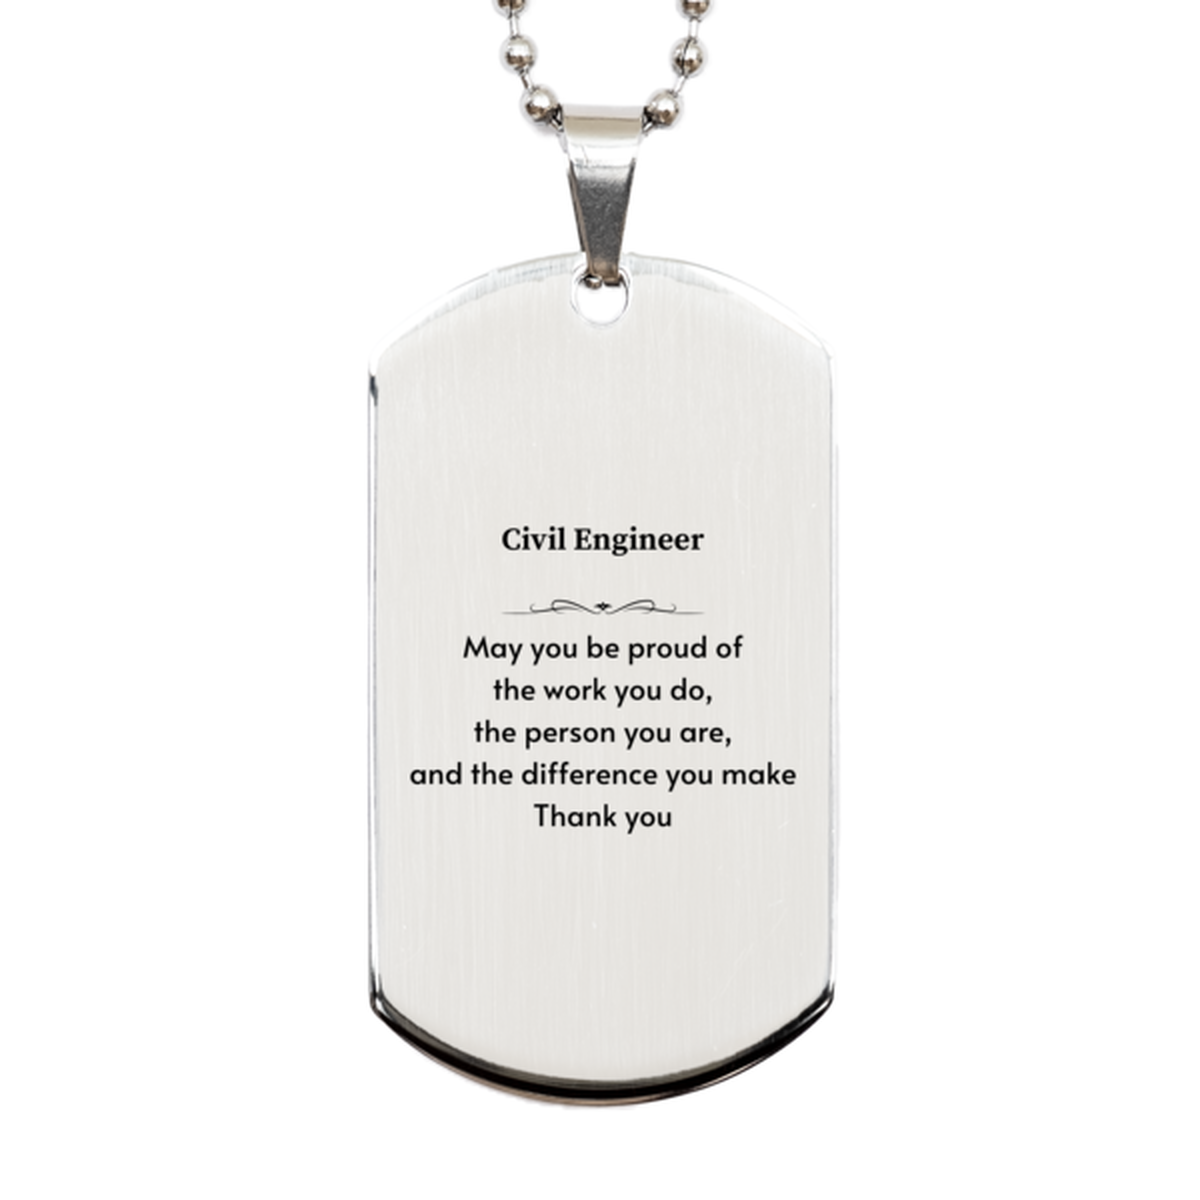 Heartwarming Silver Dog Tag Retirement Coworkers Gifts for Civil Engineer, Civil Engineer May You be proud of the work you do, the person you are Gifts for Boss Men Women Friends